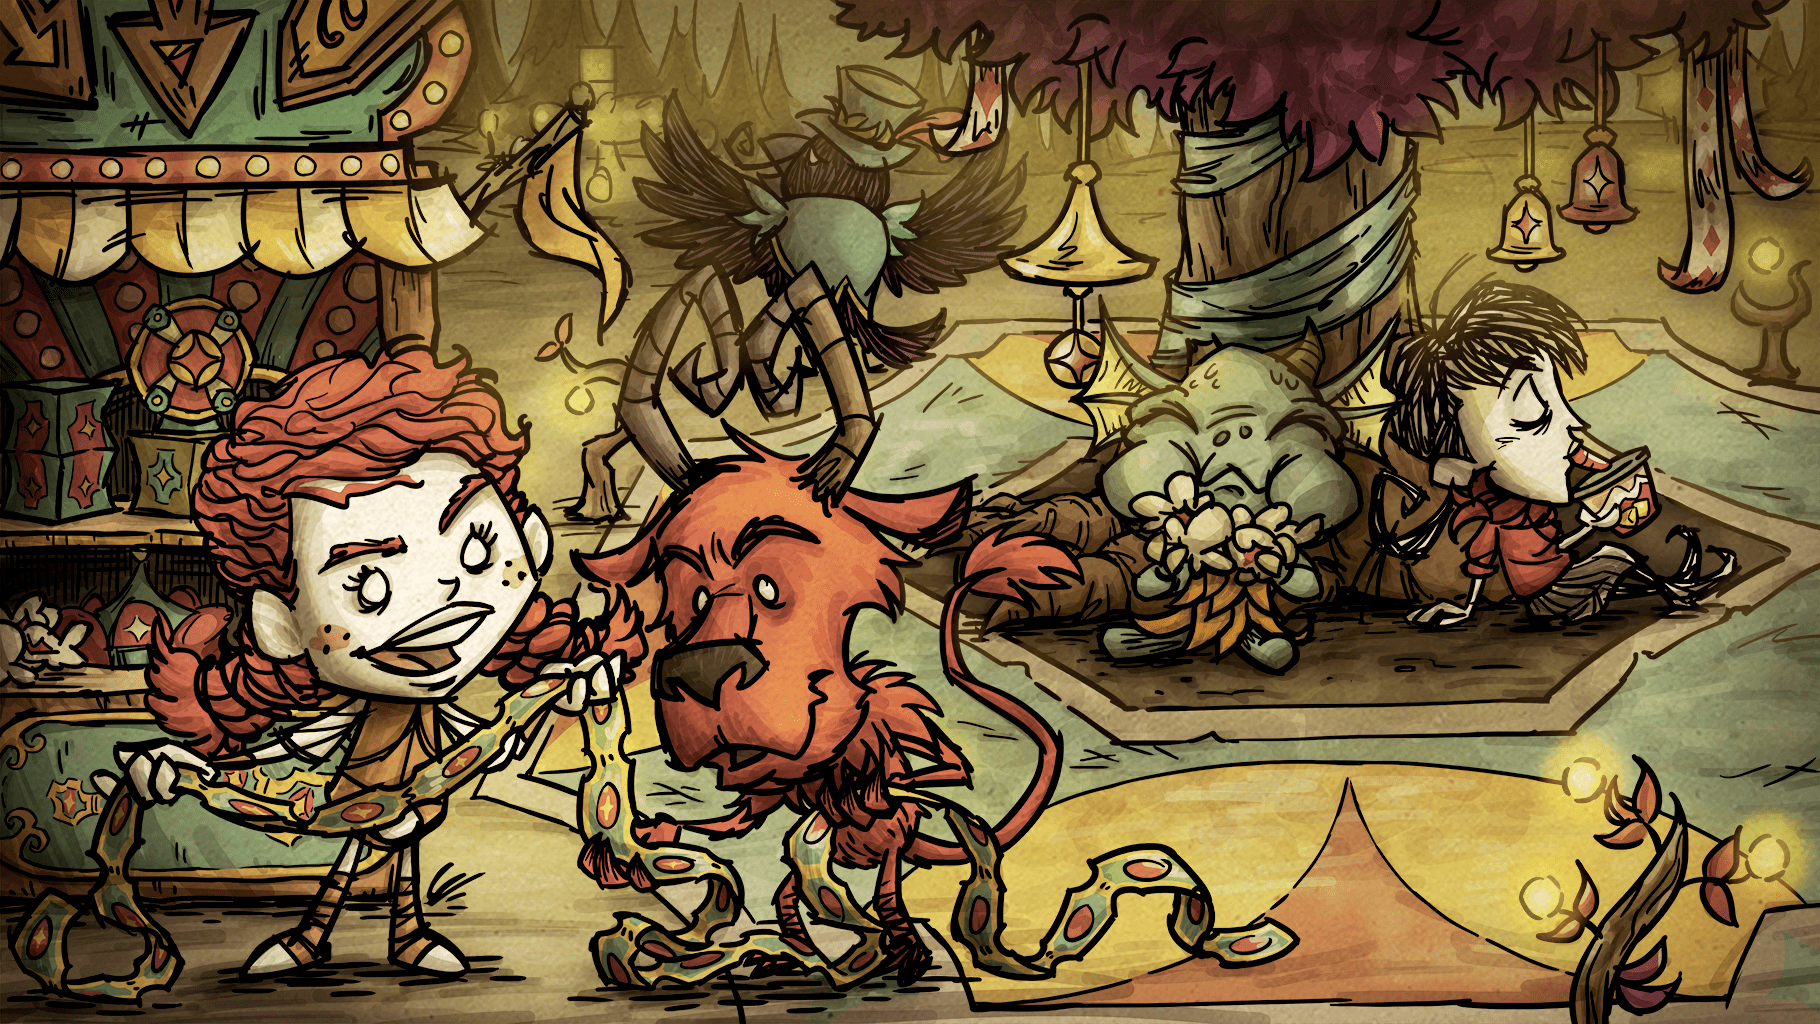 Don t Starve Together Update 2 35 Patch Notes on January 31. 